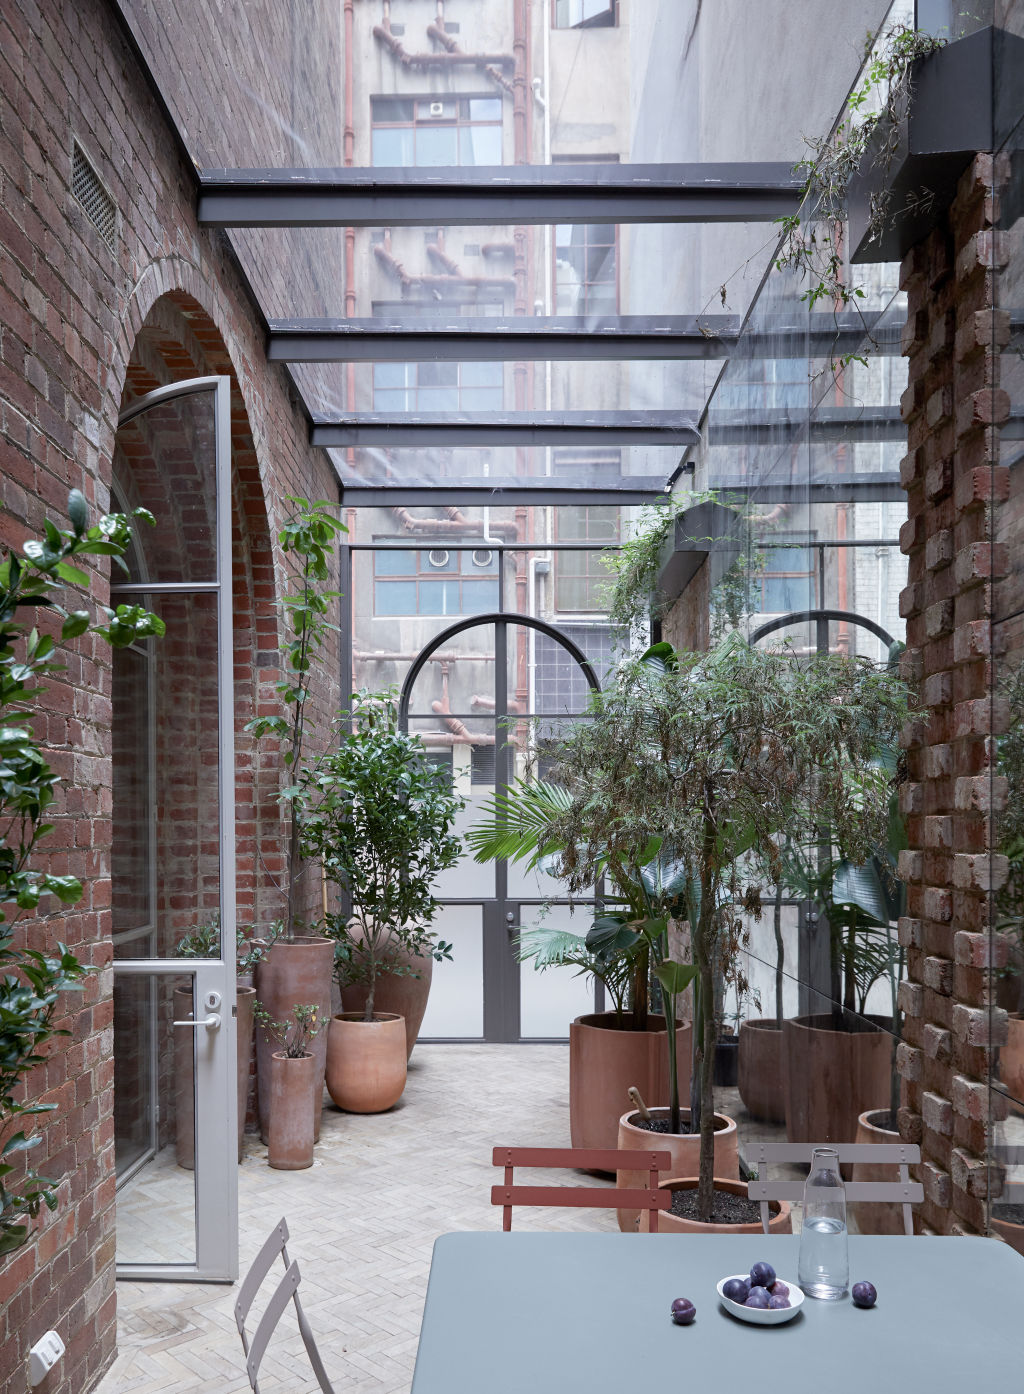 The garden atrium wraps around the interior which helps reduce the noise levels inside. Photo: James Geer, styling by Bek Sheppard